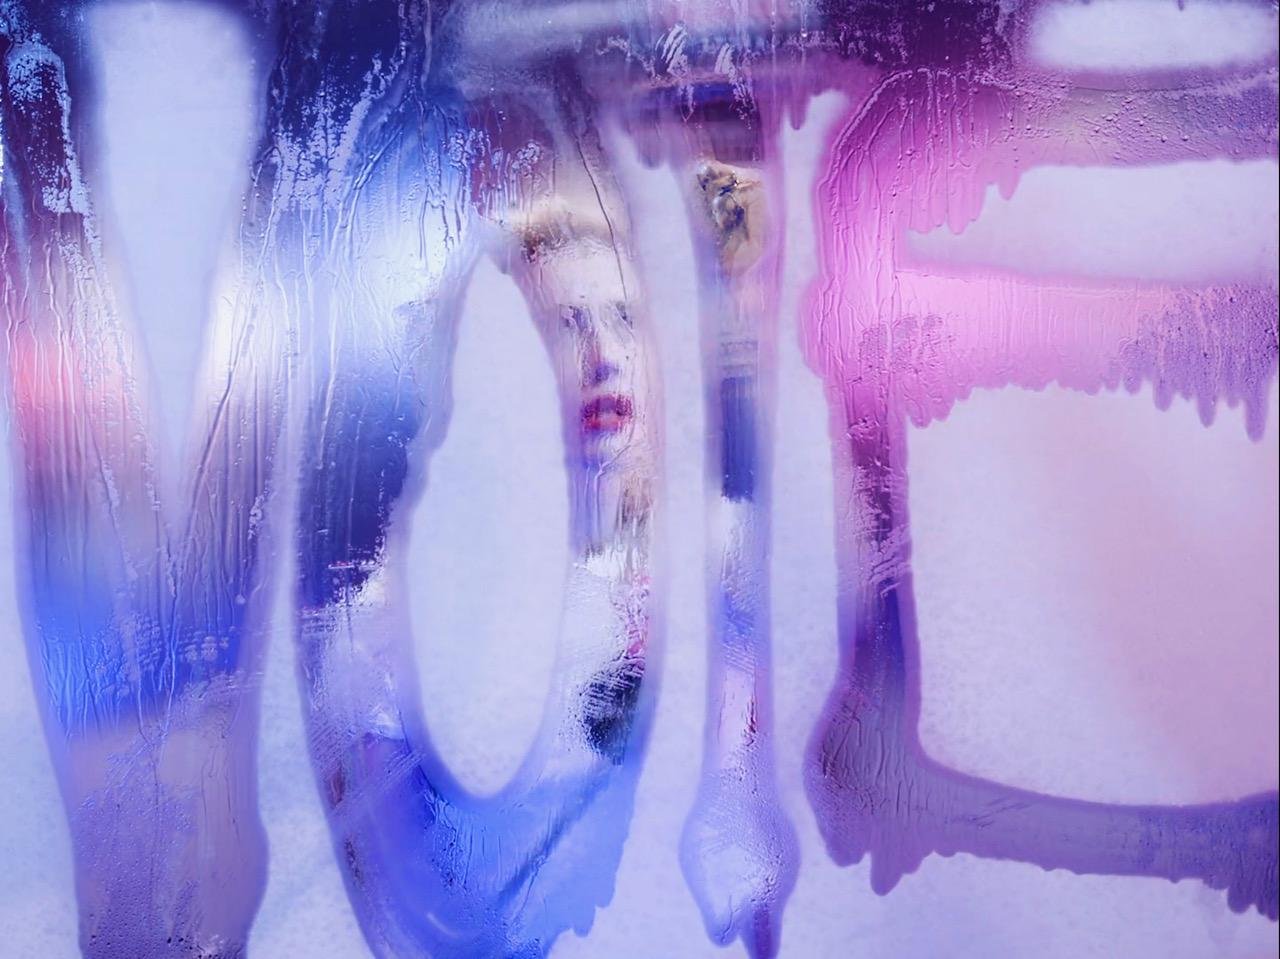 Marilyn Minter + Downtown For Democracy - MY VOTE